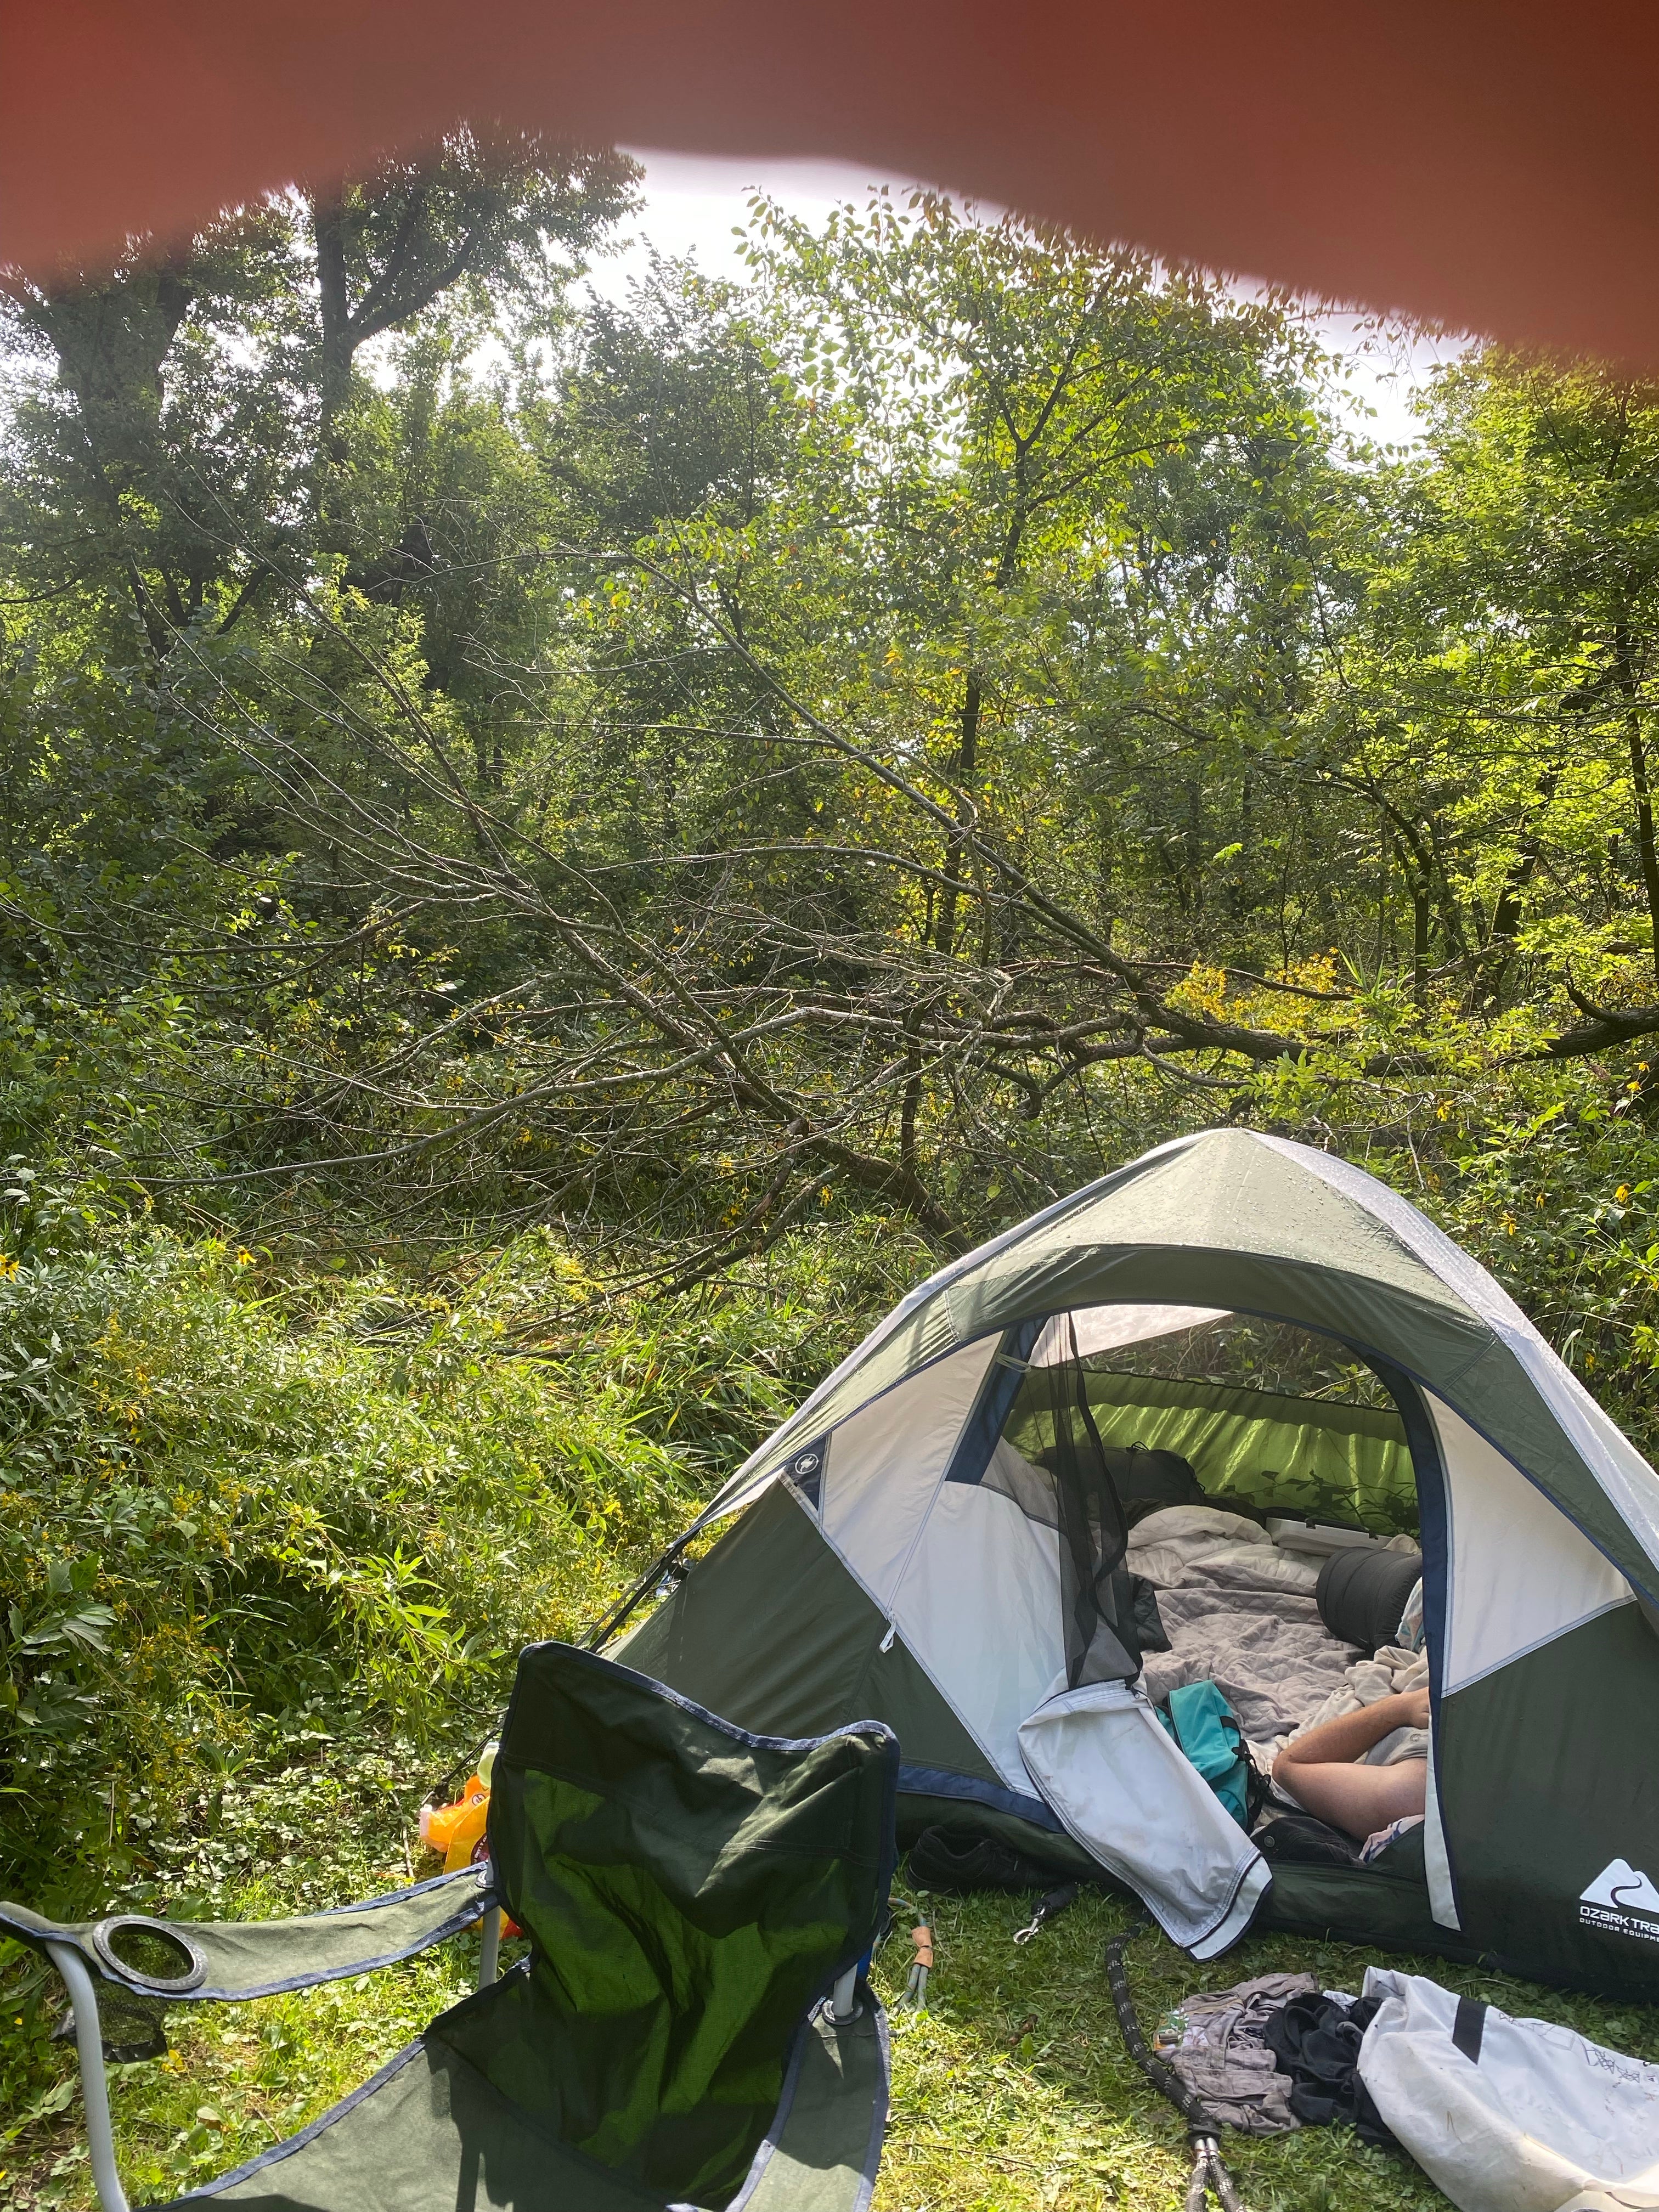 Camper submitted image from Cannon River Wilderness Area - 1